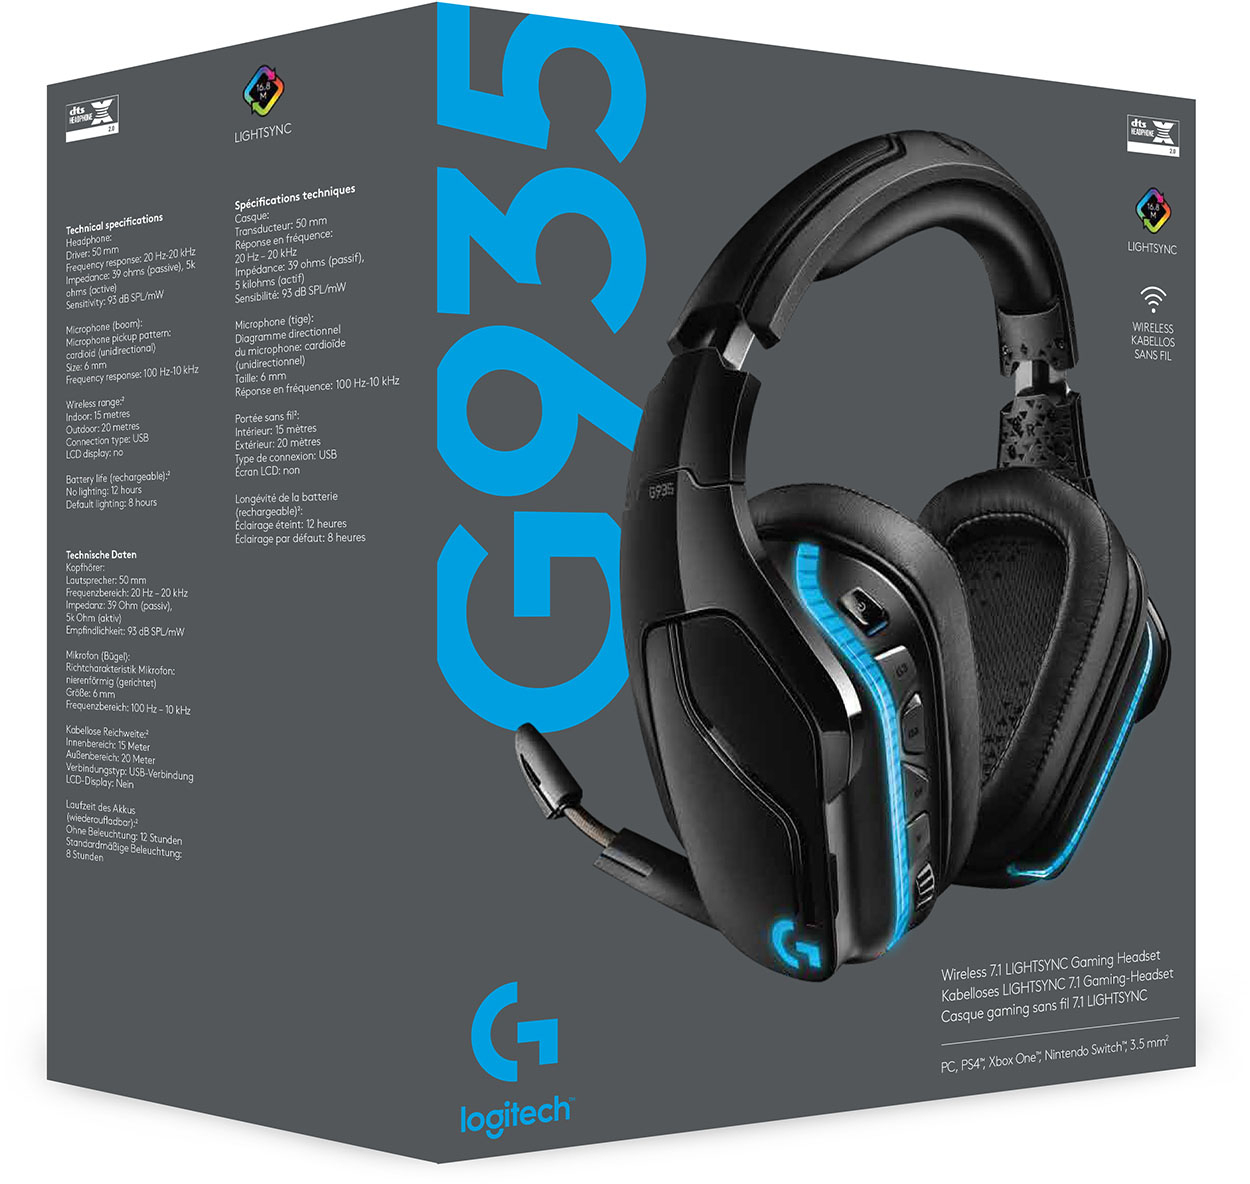 Logitech G935 7.1 Sound Over-the-Ear Gaming Headset for PC with LIGHTSYNC RGB Lighting Black/Blue - Best Buy